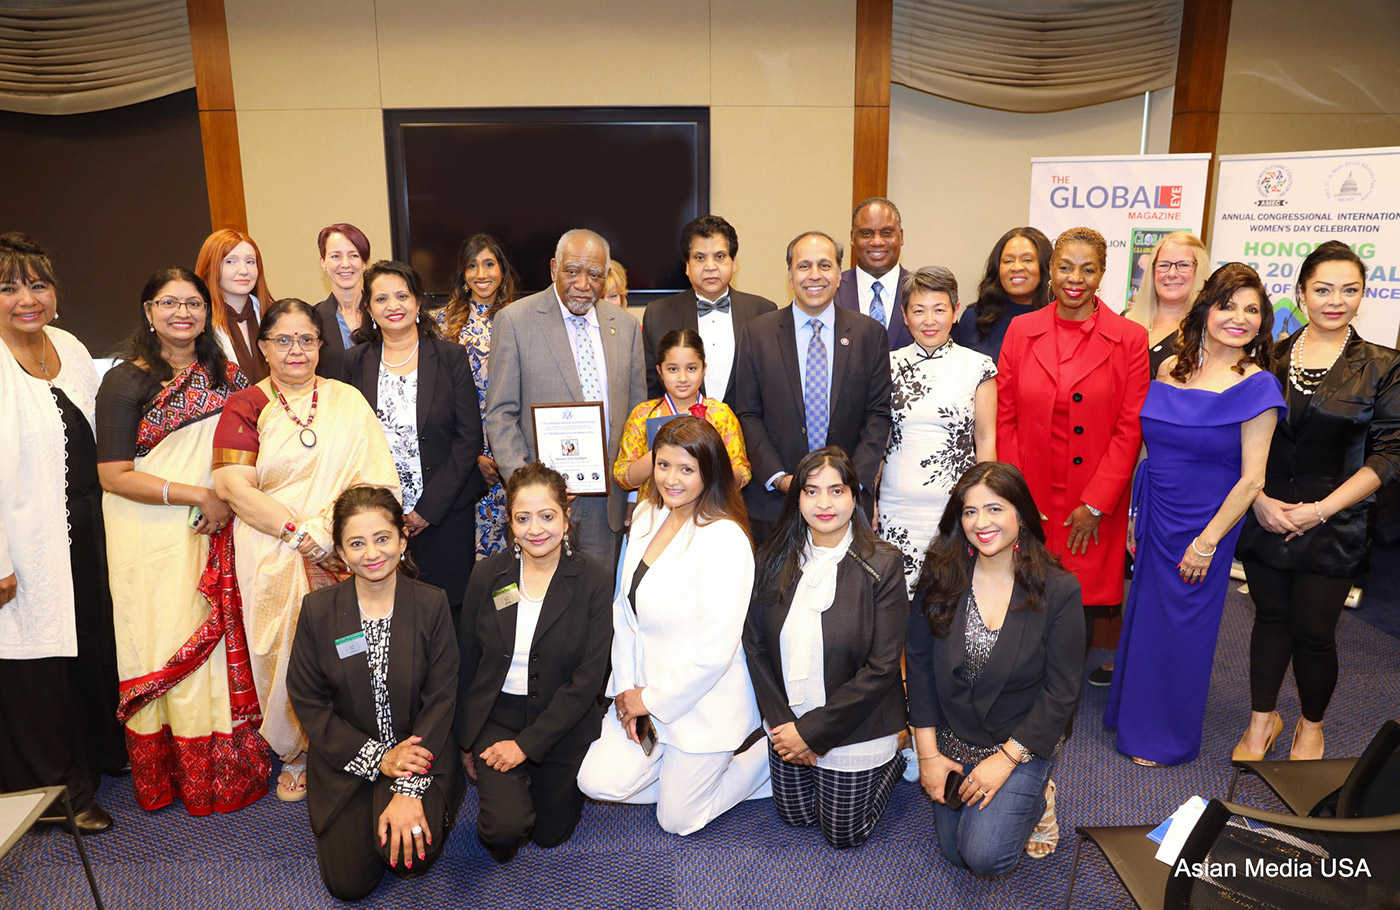 AMEC & MEATF Hosts 11th Annual Congressional International Women’s Day Celebration at Capitol Hill, Washington D.C.